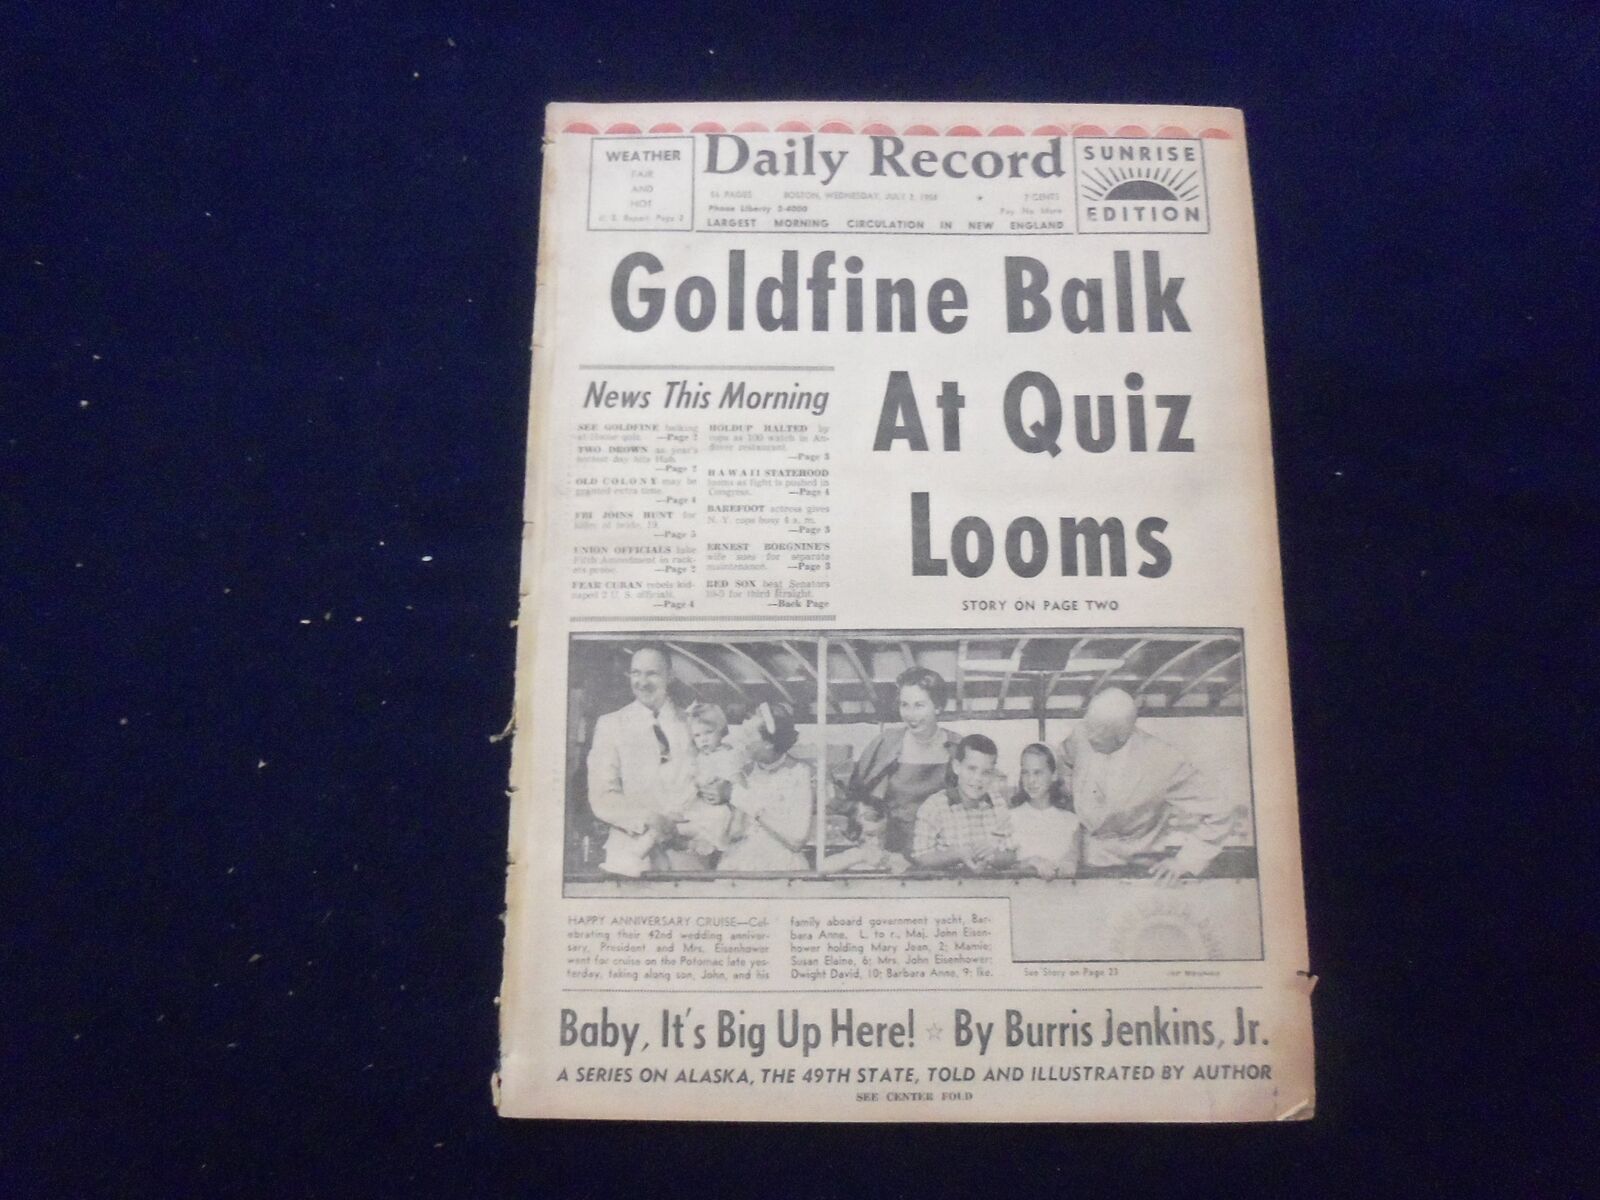 1958 JULY 2 BOSTON DAILY RECORD NEWSPAPER - GOLDFINE BALK AT QUIZ LOOMS- NP 6345